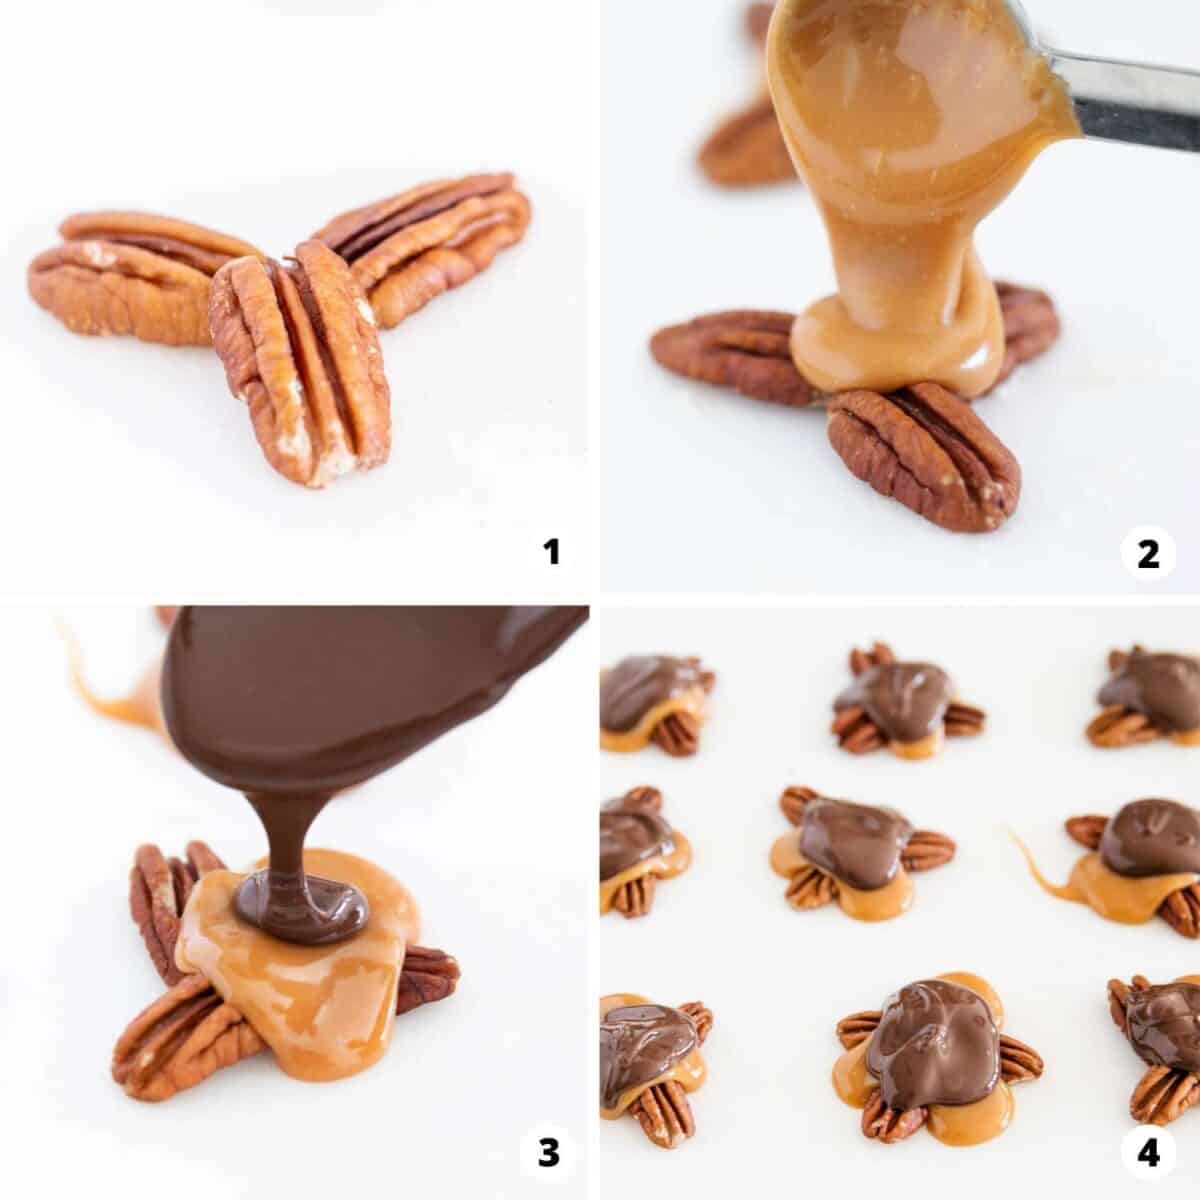 Showing how to make chocolate turtles.